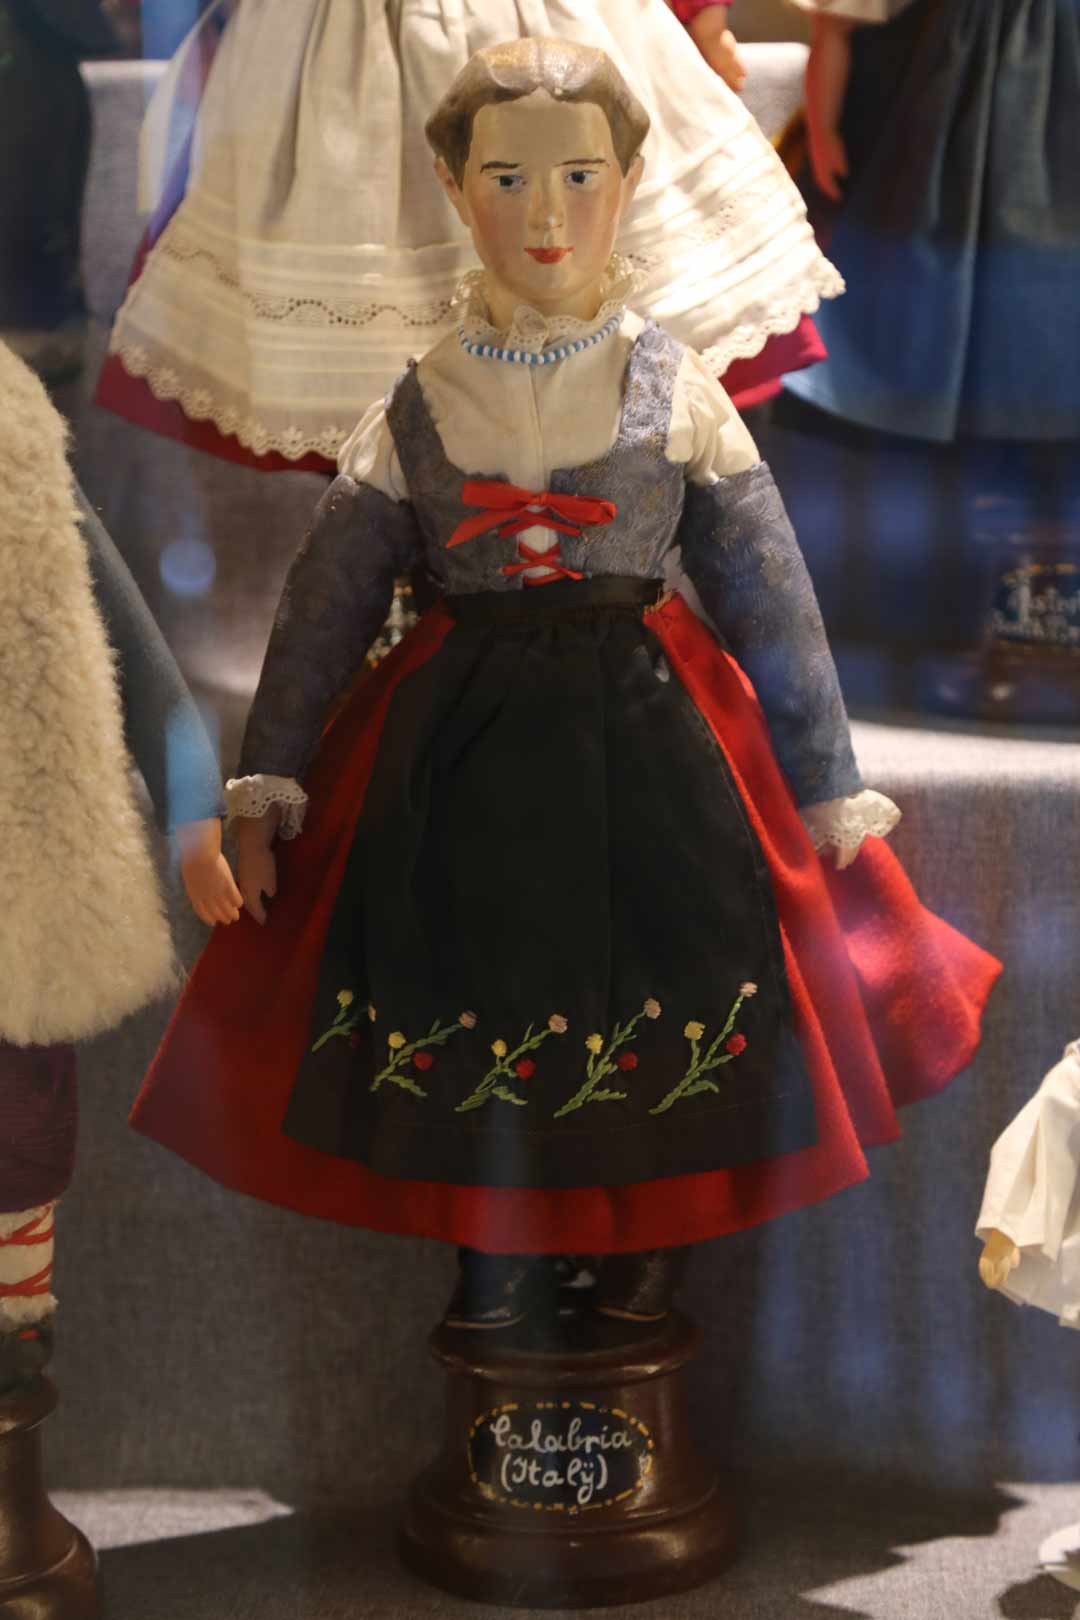 Female doll from Italy wearing a red and black dress with embroidery